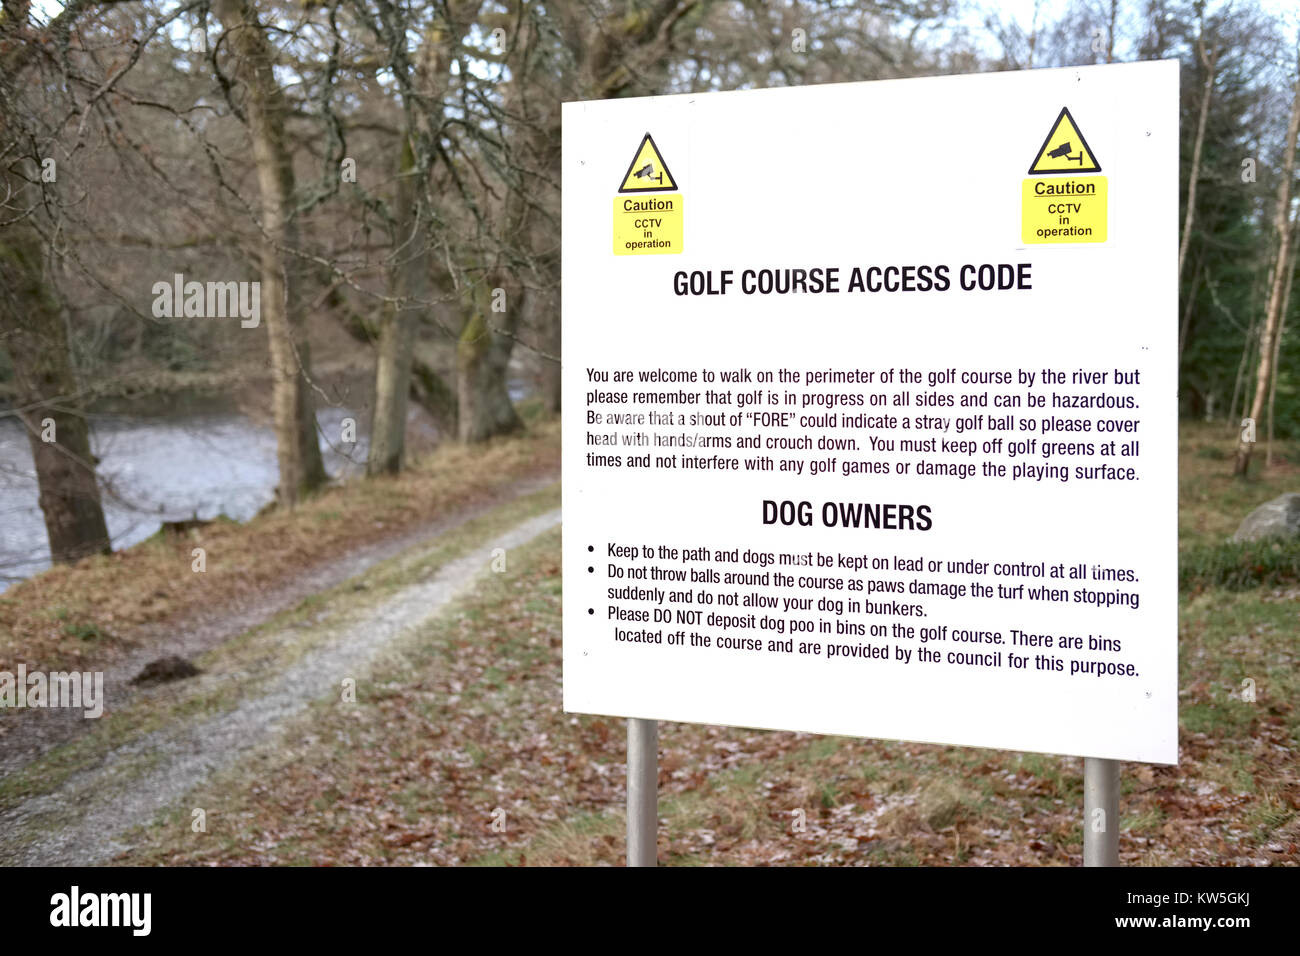 Golf course access code rules for public walkers and dog owners sign caution and warning danger of stray balls Stock Photo